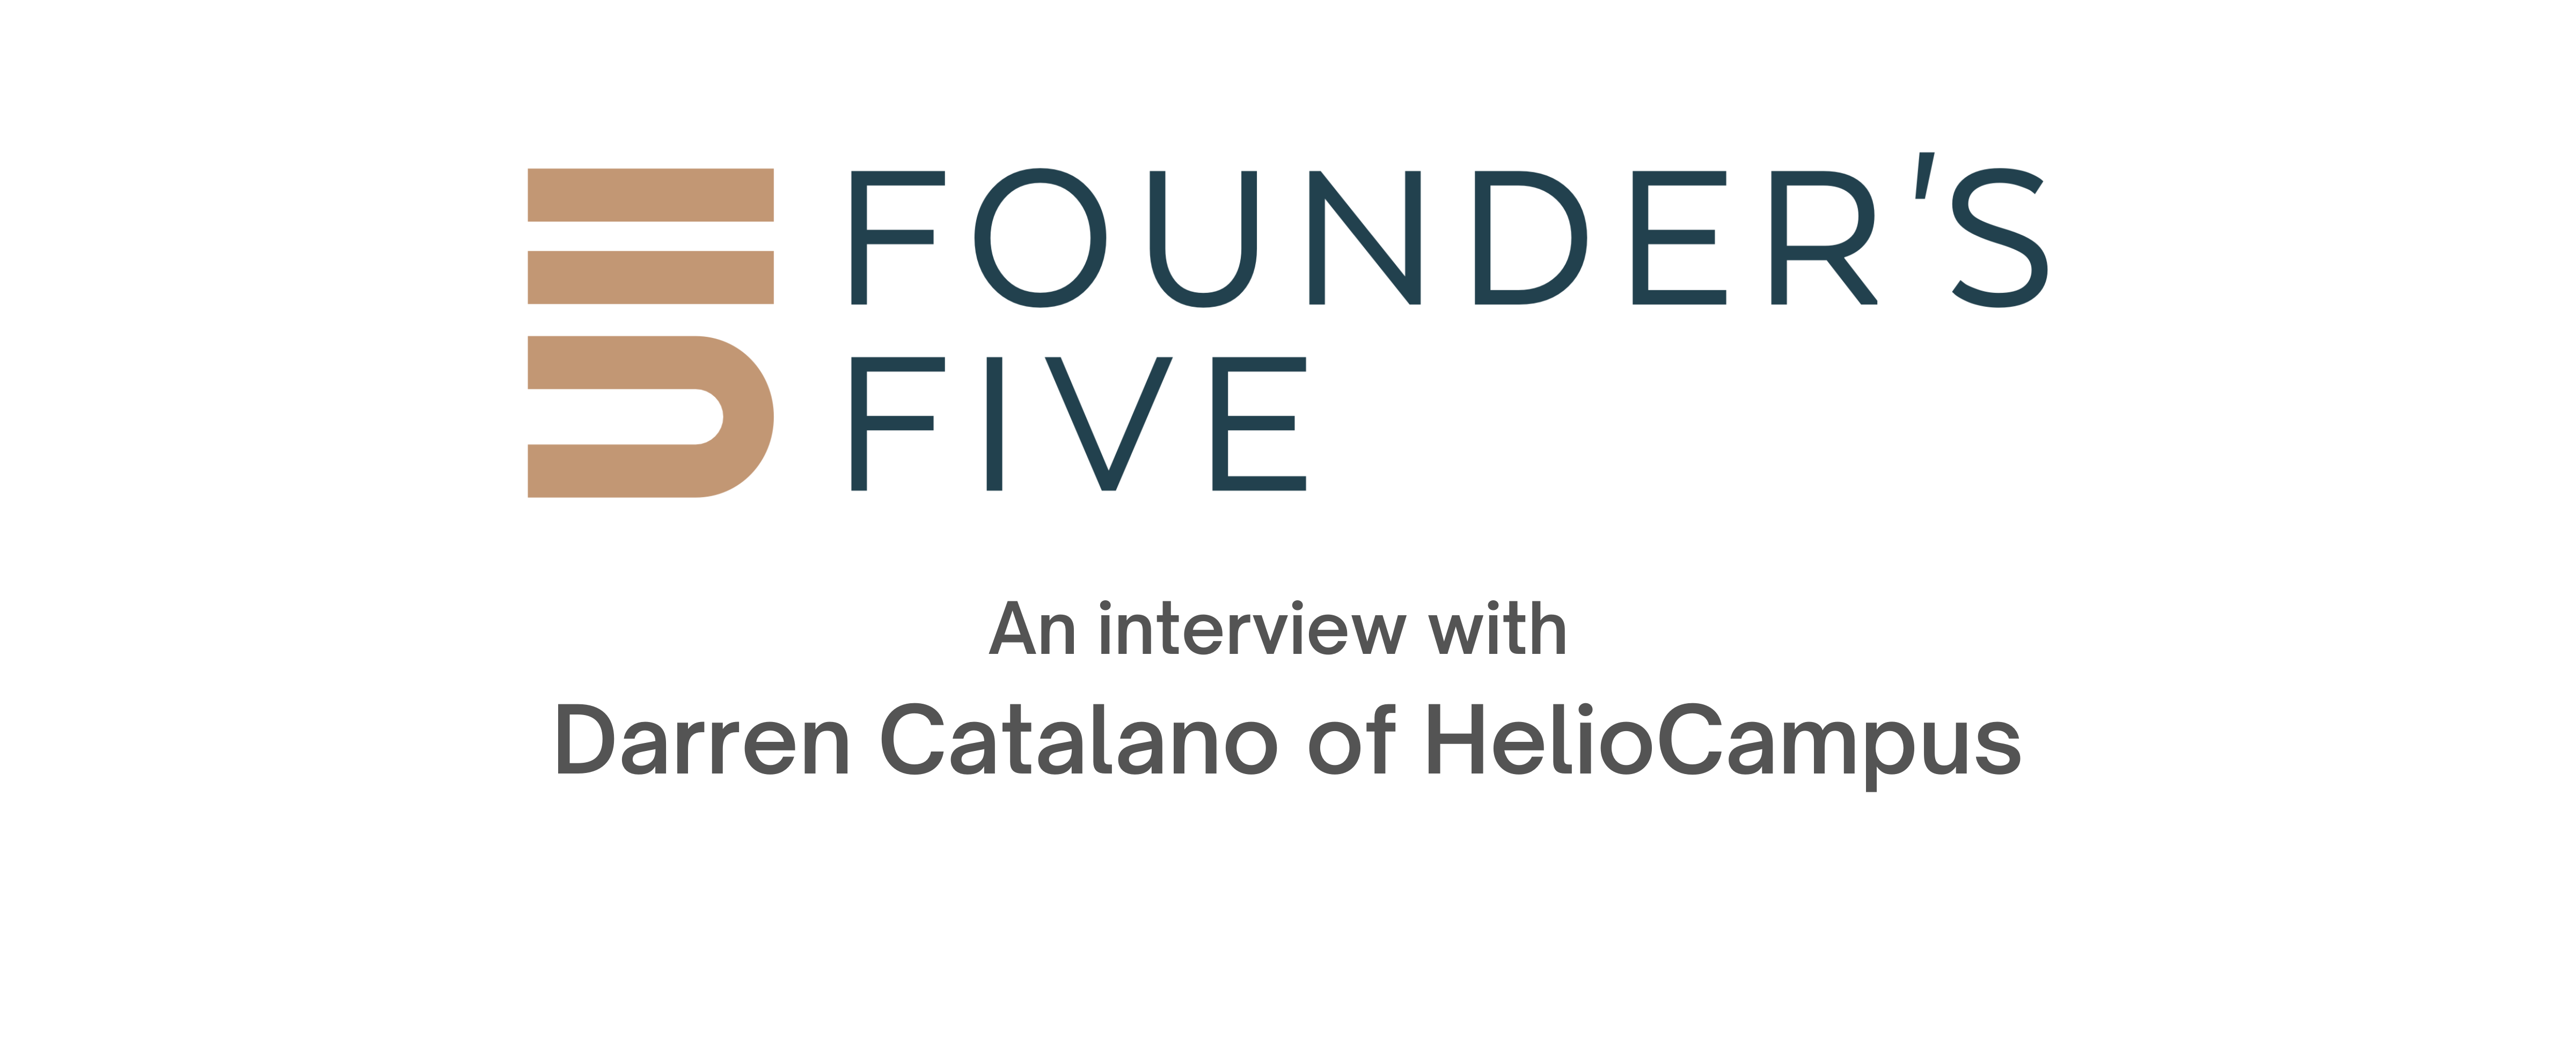 Tyton Partners Founder's Five Darren Catalano of HelioCampus